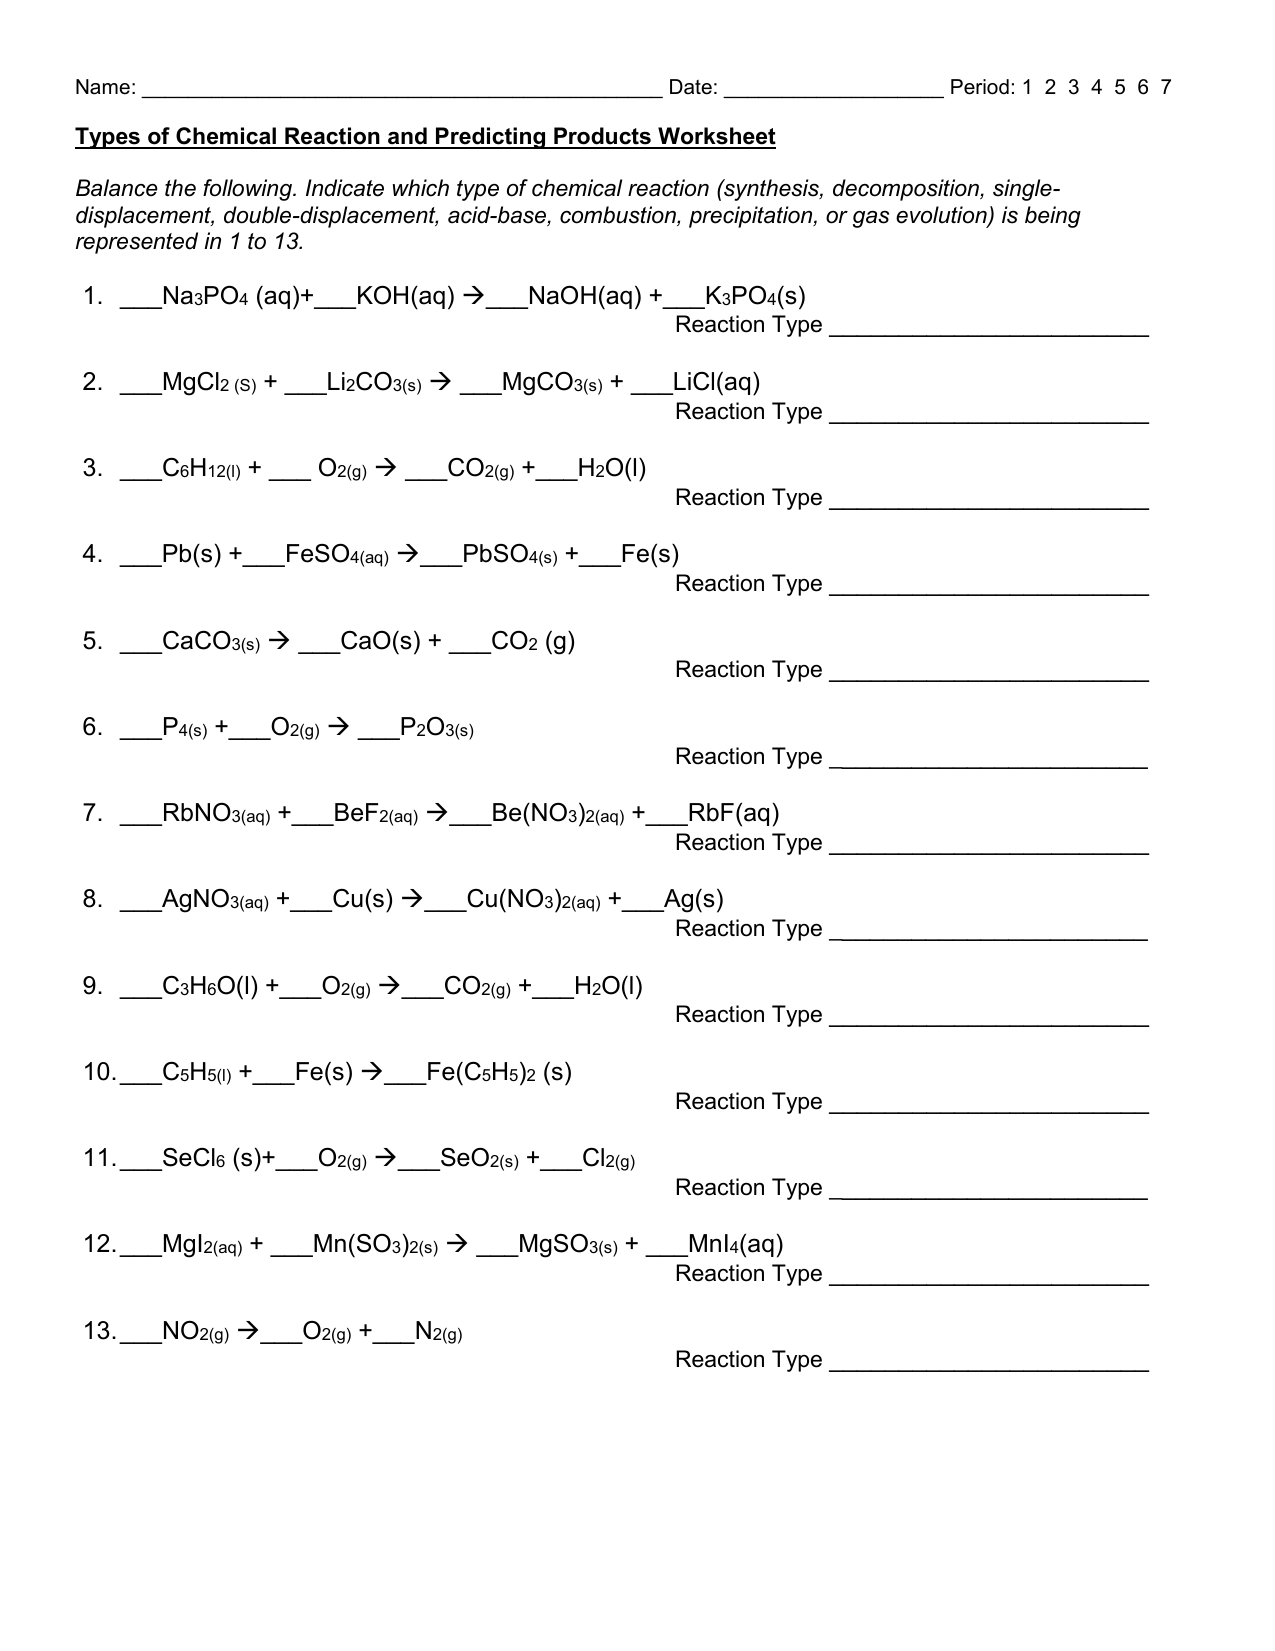 Types of Chemical Reaction and Predicting Products Worksheet For Chemical Reactions Types Worksheet